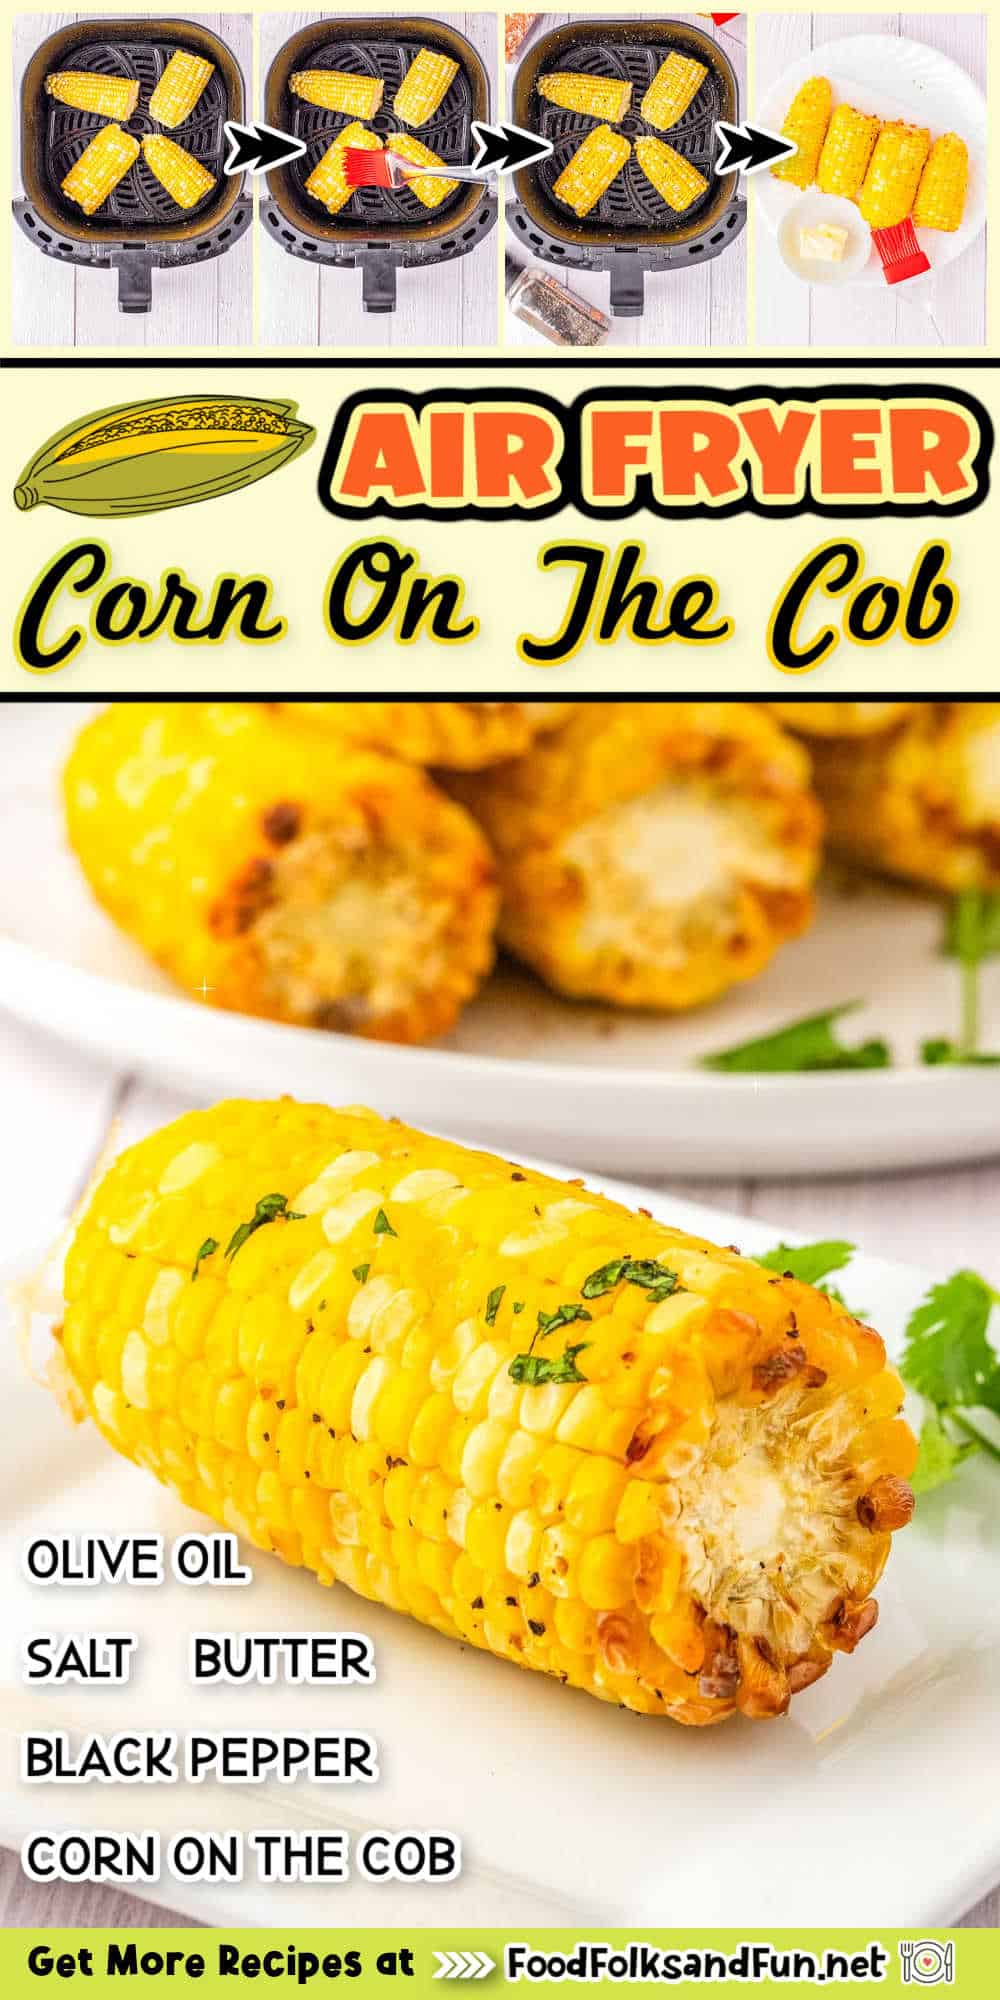 Deliciously charred air fryer corn on the cob made effortlessly in the air fryer. Enjoy perfectly cooked kernels with a hint of seasoning in minutes.  via @foodfolksandfun